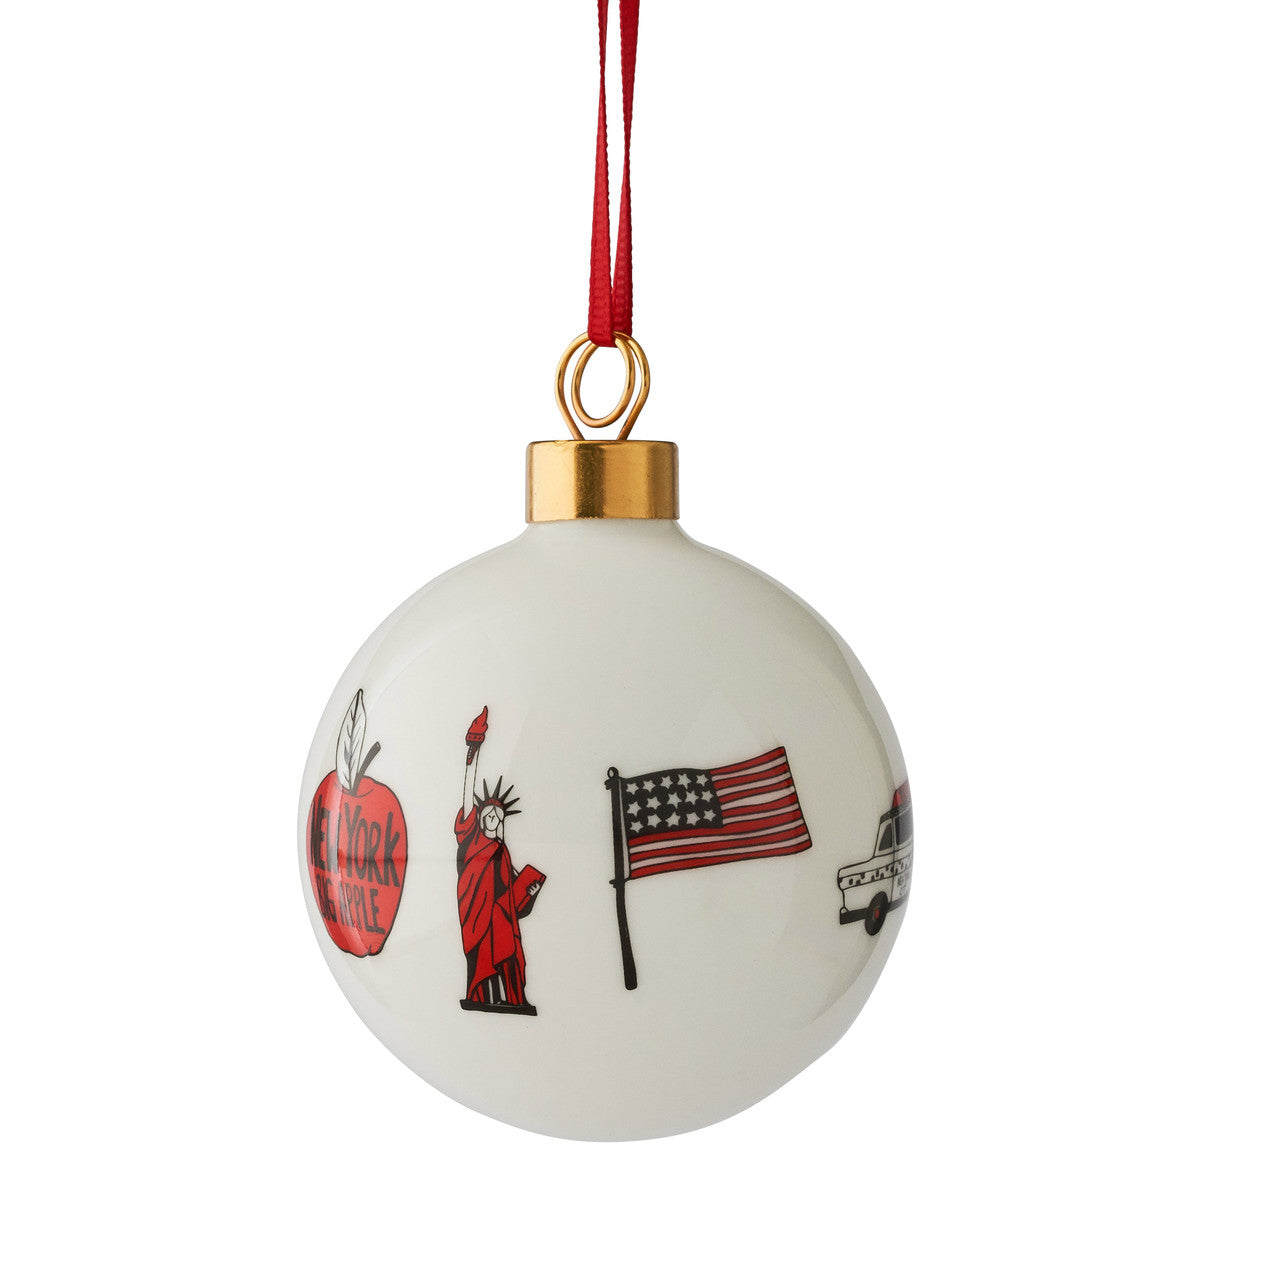 Bone china New York, New York Christmas bus bauble from Victoria Eggs.